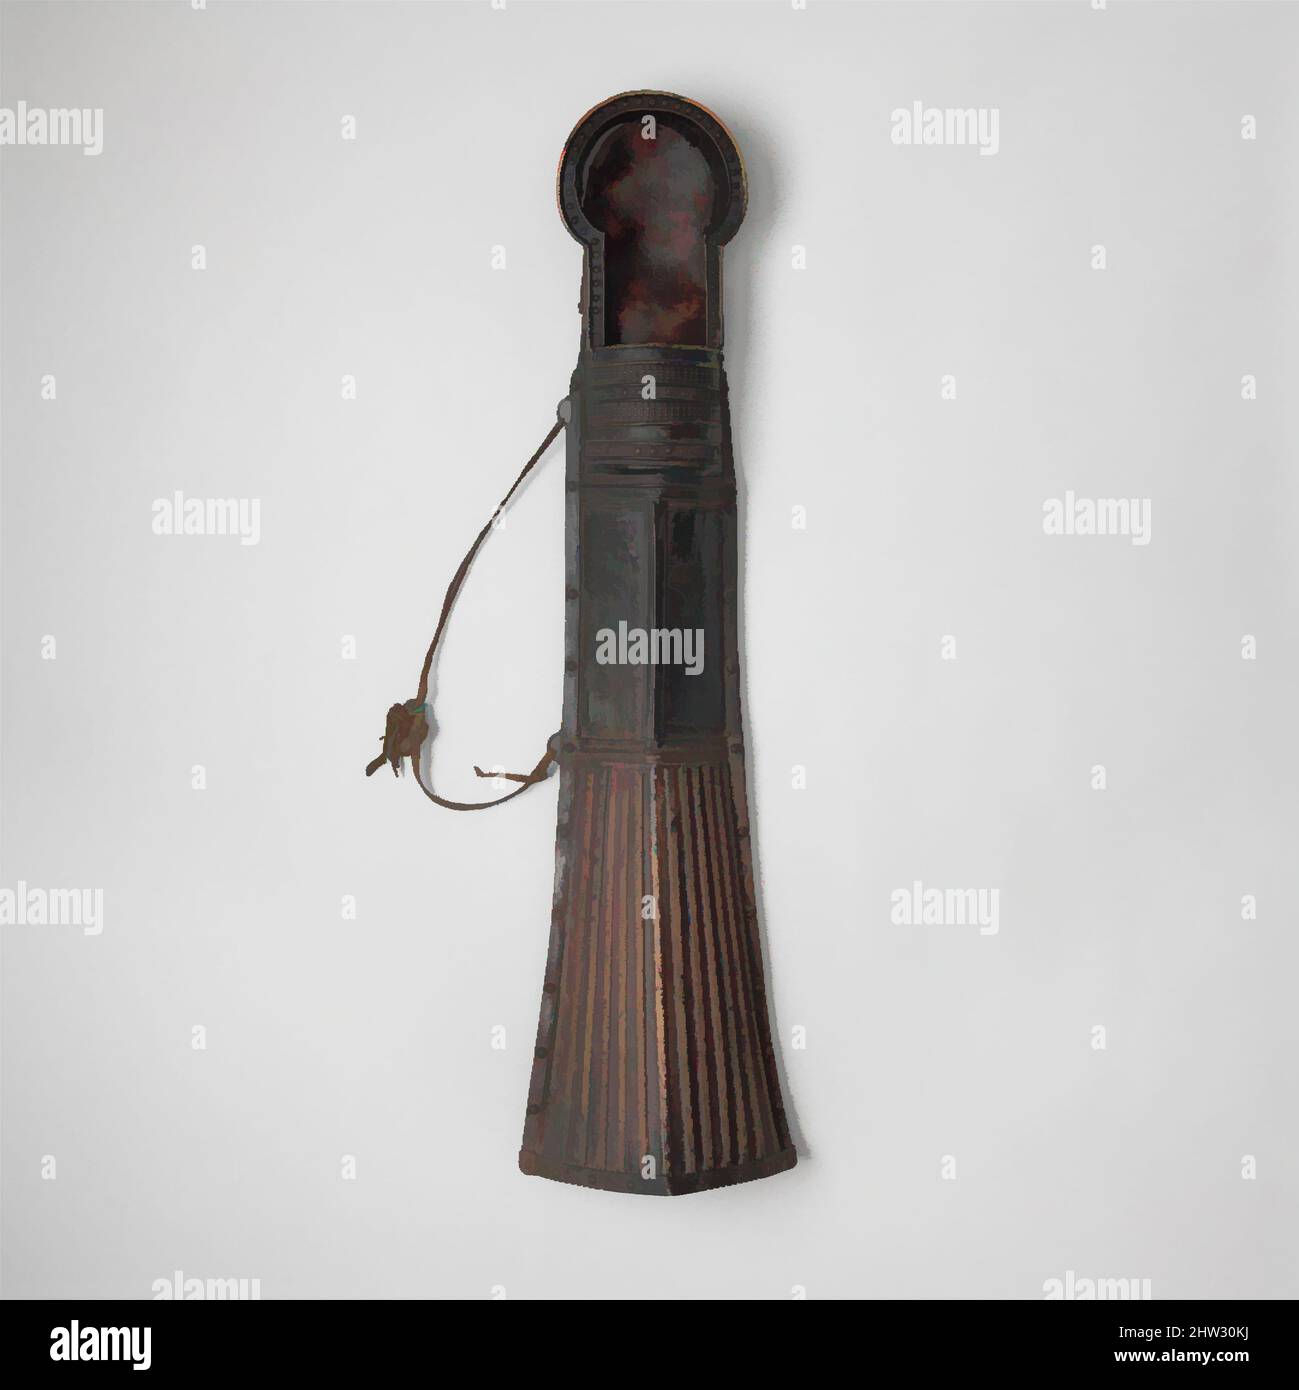 Art inspired by Quiver (mda' shubs) with Accessory, late 13th–15th century, Tibetan or Mongolian, Leather, iron, copper alloy, wicker (bamboo or cane), wood, L. 32 1/2 in. (82.6 cm); W. 8 7/8 in. (22.5 cm), Archery Equipment-Bows, This quiver represents a very rare type, the basic form, Classic works modernized by Artotop with a splash of modernity. Shapes, color and value, eye-catching visual impact on art. Emotions through freedom of artworks in a contemporary way. A timeless message pursuing a wildly creative new direction. Artists turning to the digital medium and creating the Artotop NFT Stock Photo